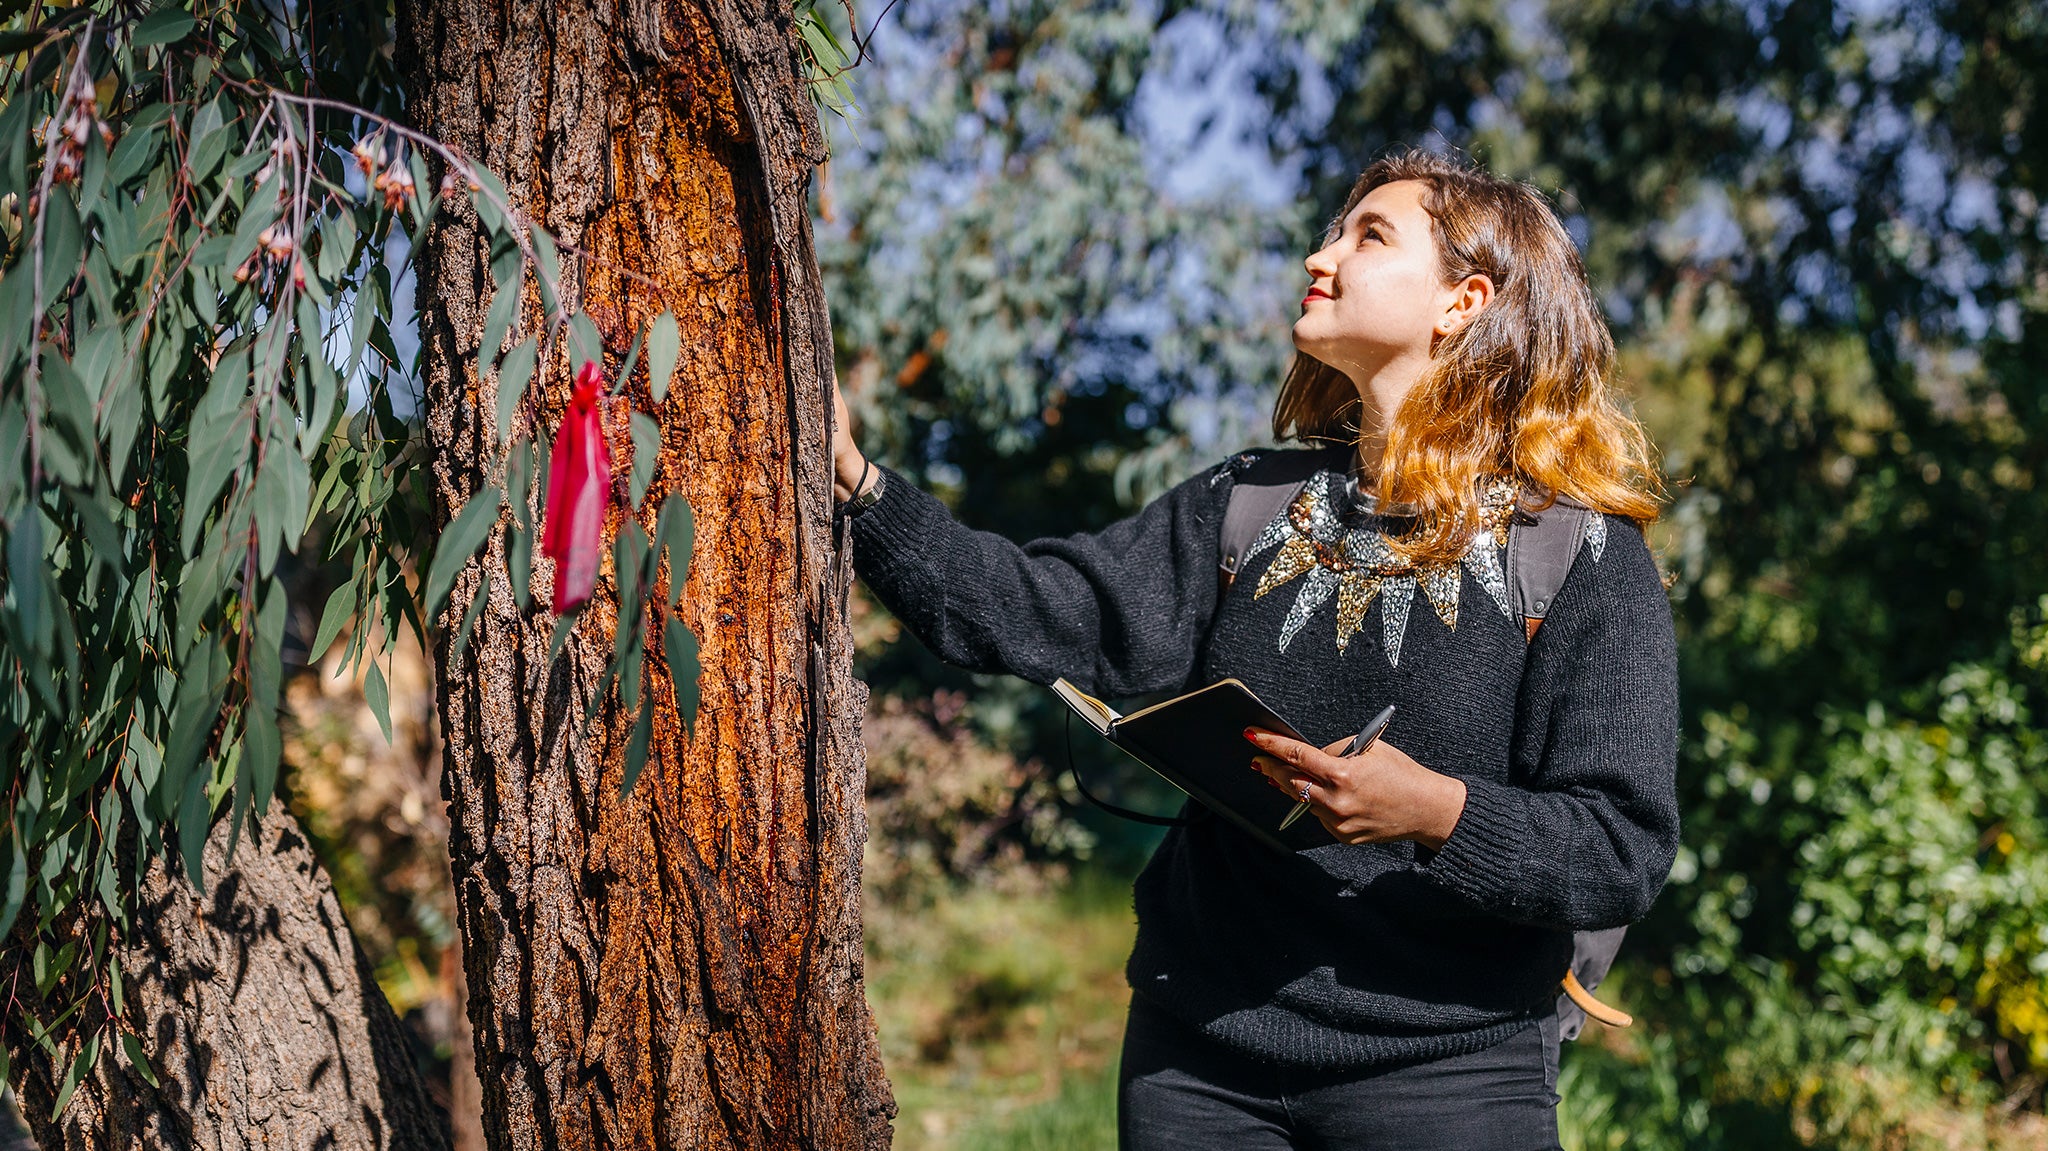 A student observes the bark of a tree and makes notes.